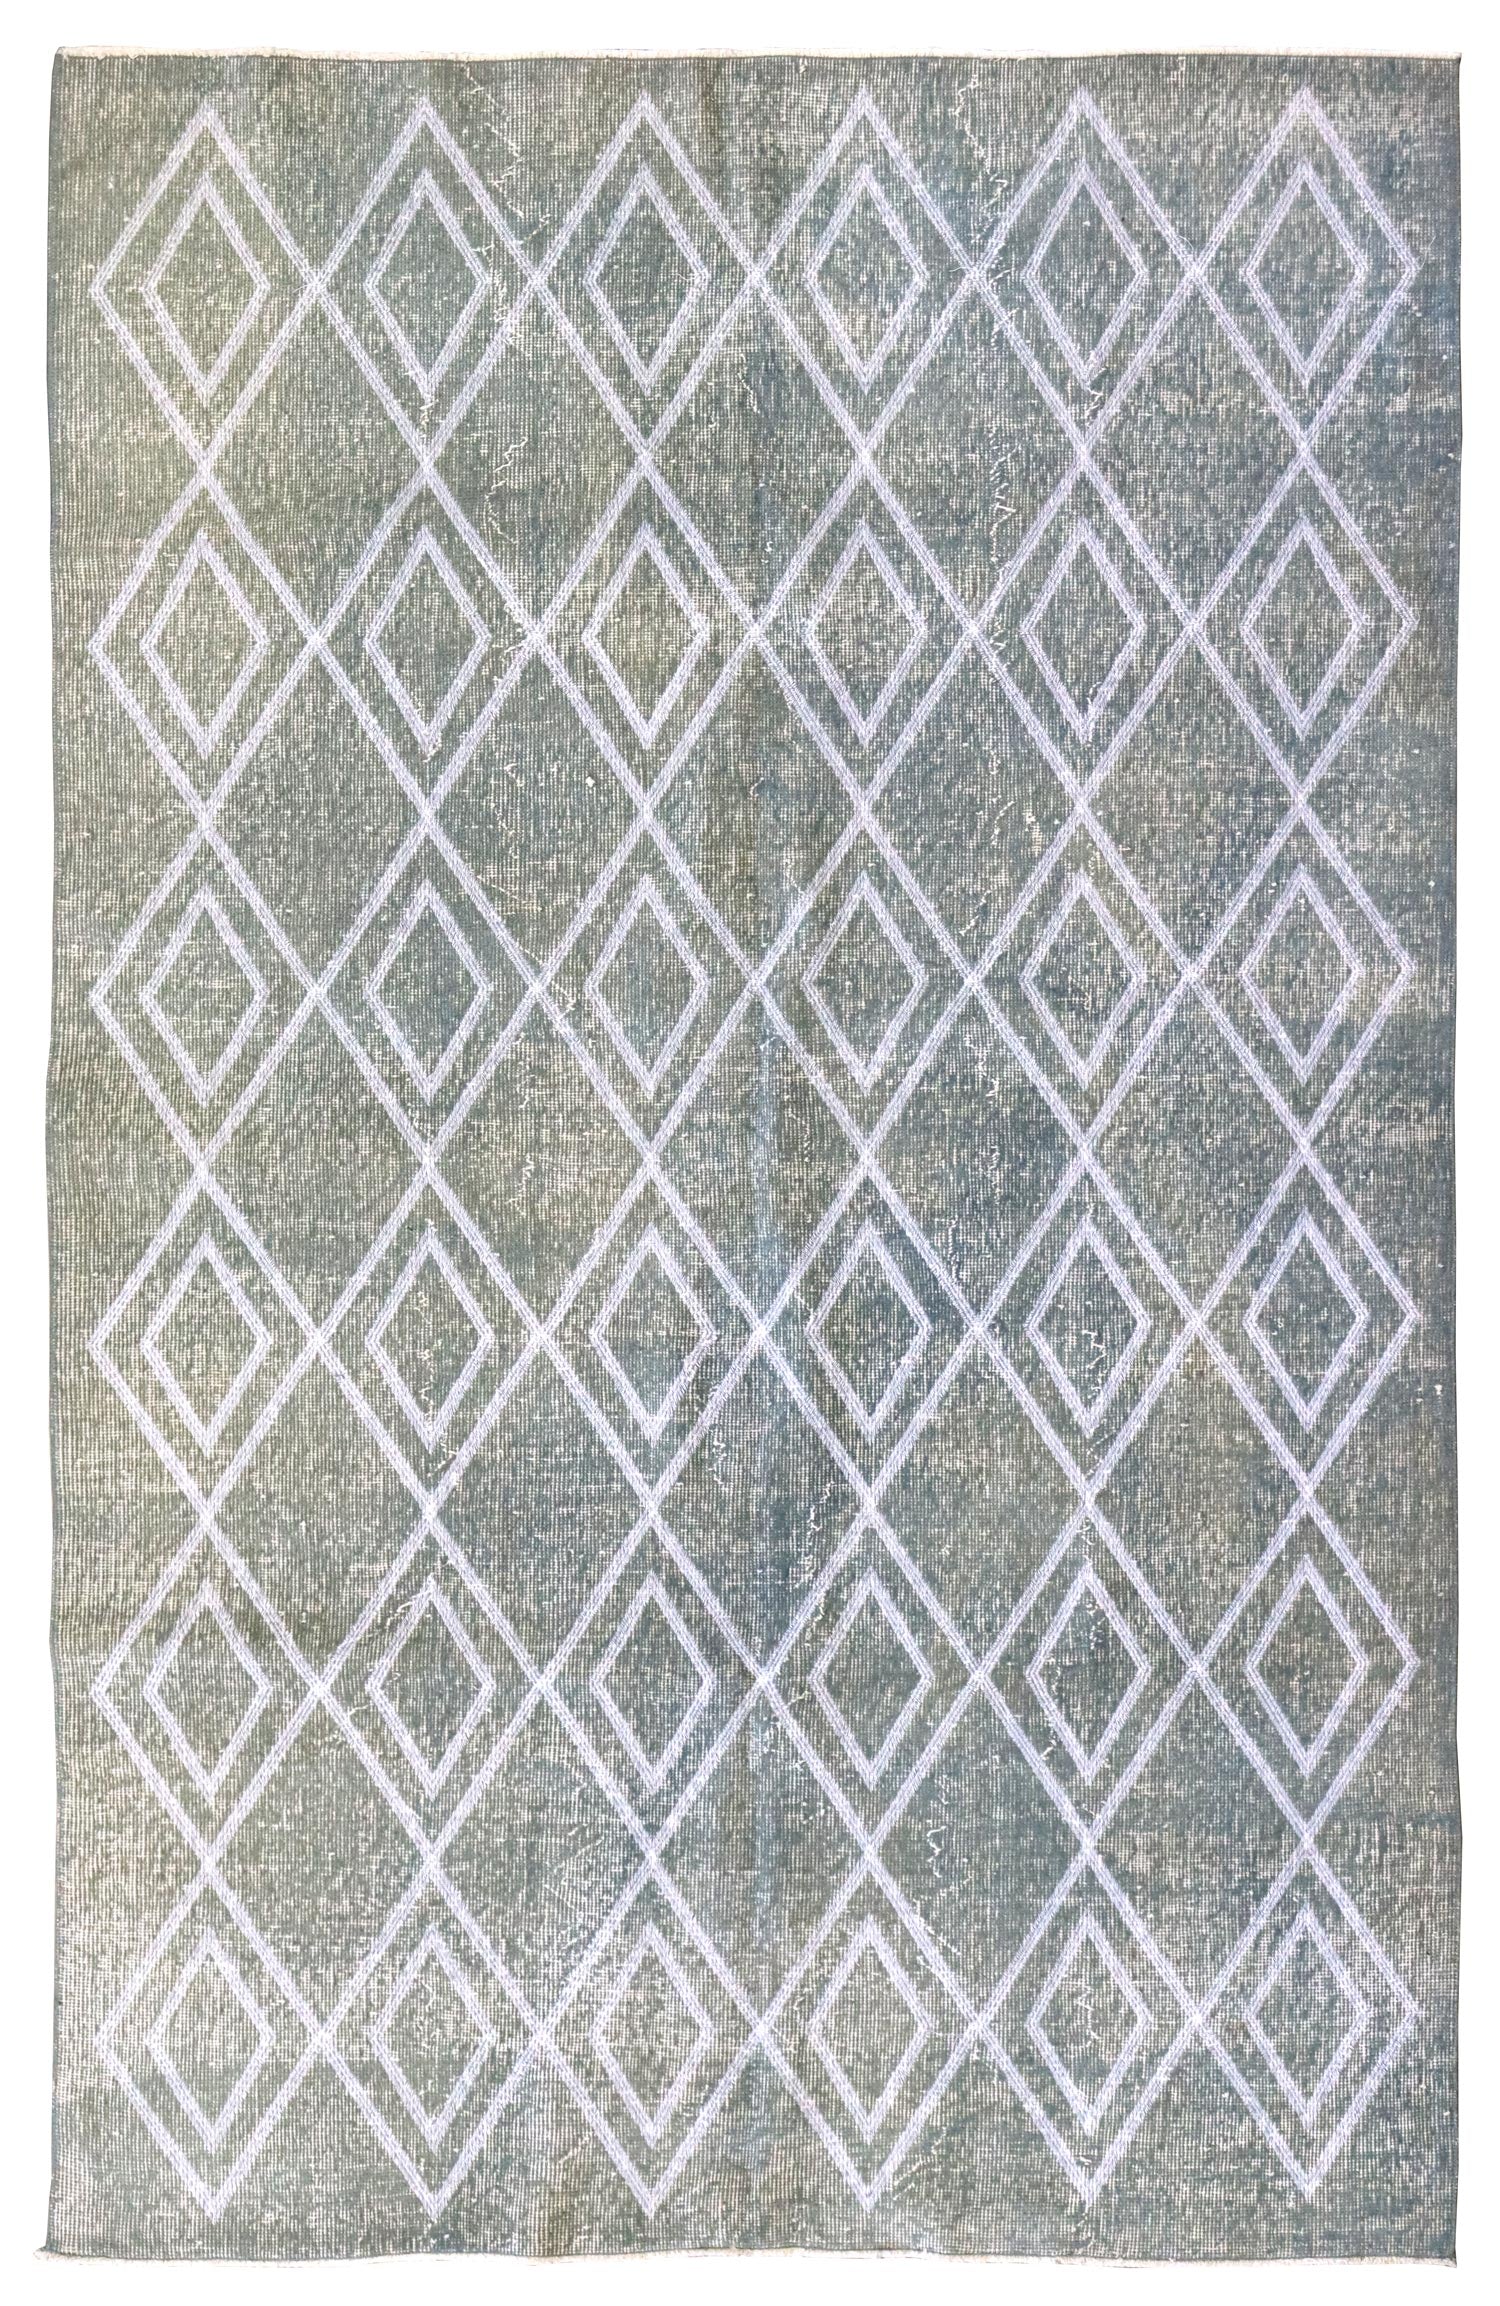 Vintage Embroidered Overdye Handwoven Contemporary Rug